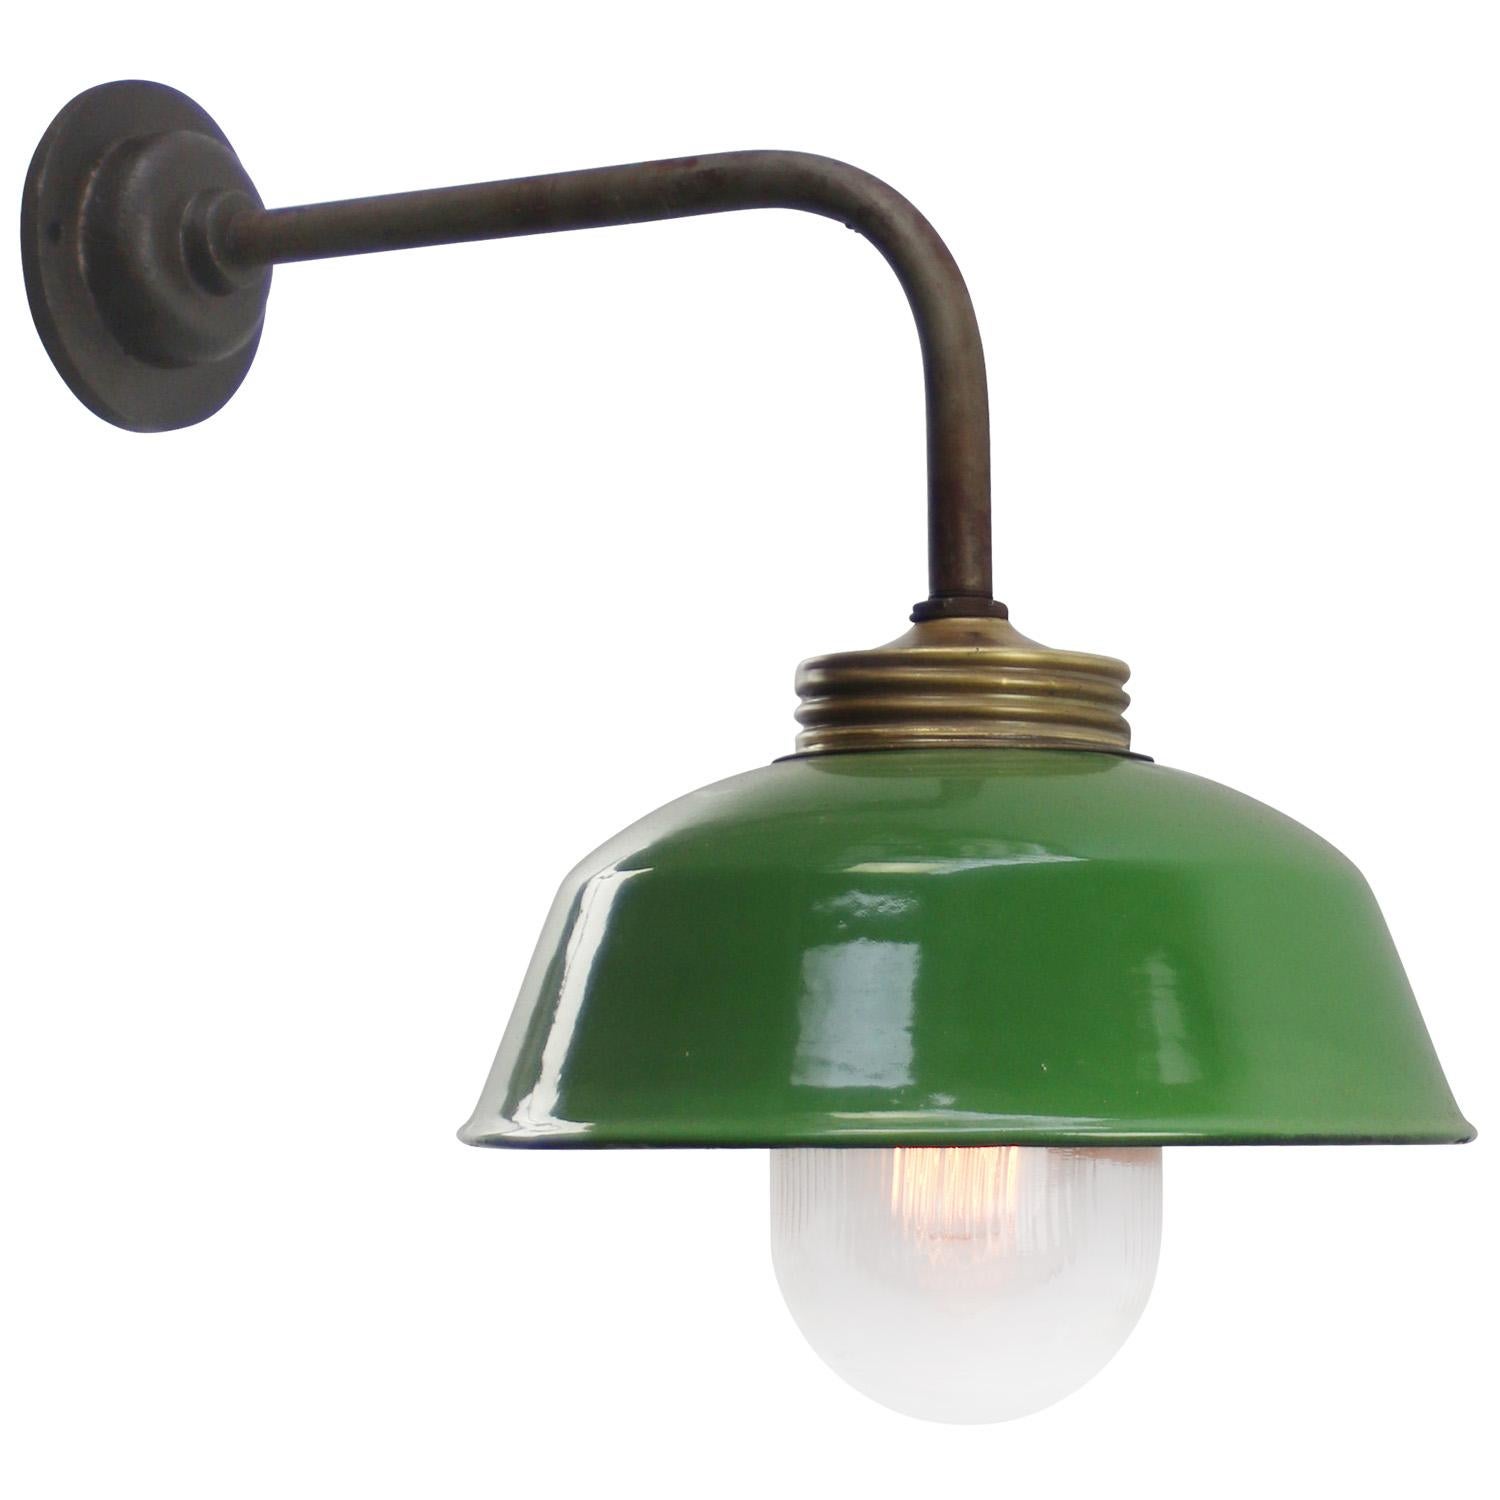 Rust Cast Iron Barn light
Green enamel shade, brass top, clear striped glass

Diameter cast iron wall piece: 10.5 cm / 4 inches
2 holes to secure

Weight: 2.00 kg / 4.4 lb

Priced per individual item. All lamps have been made suitable by